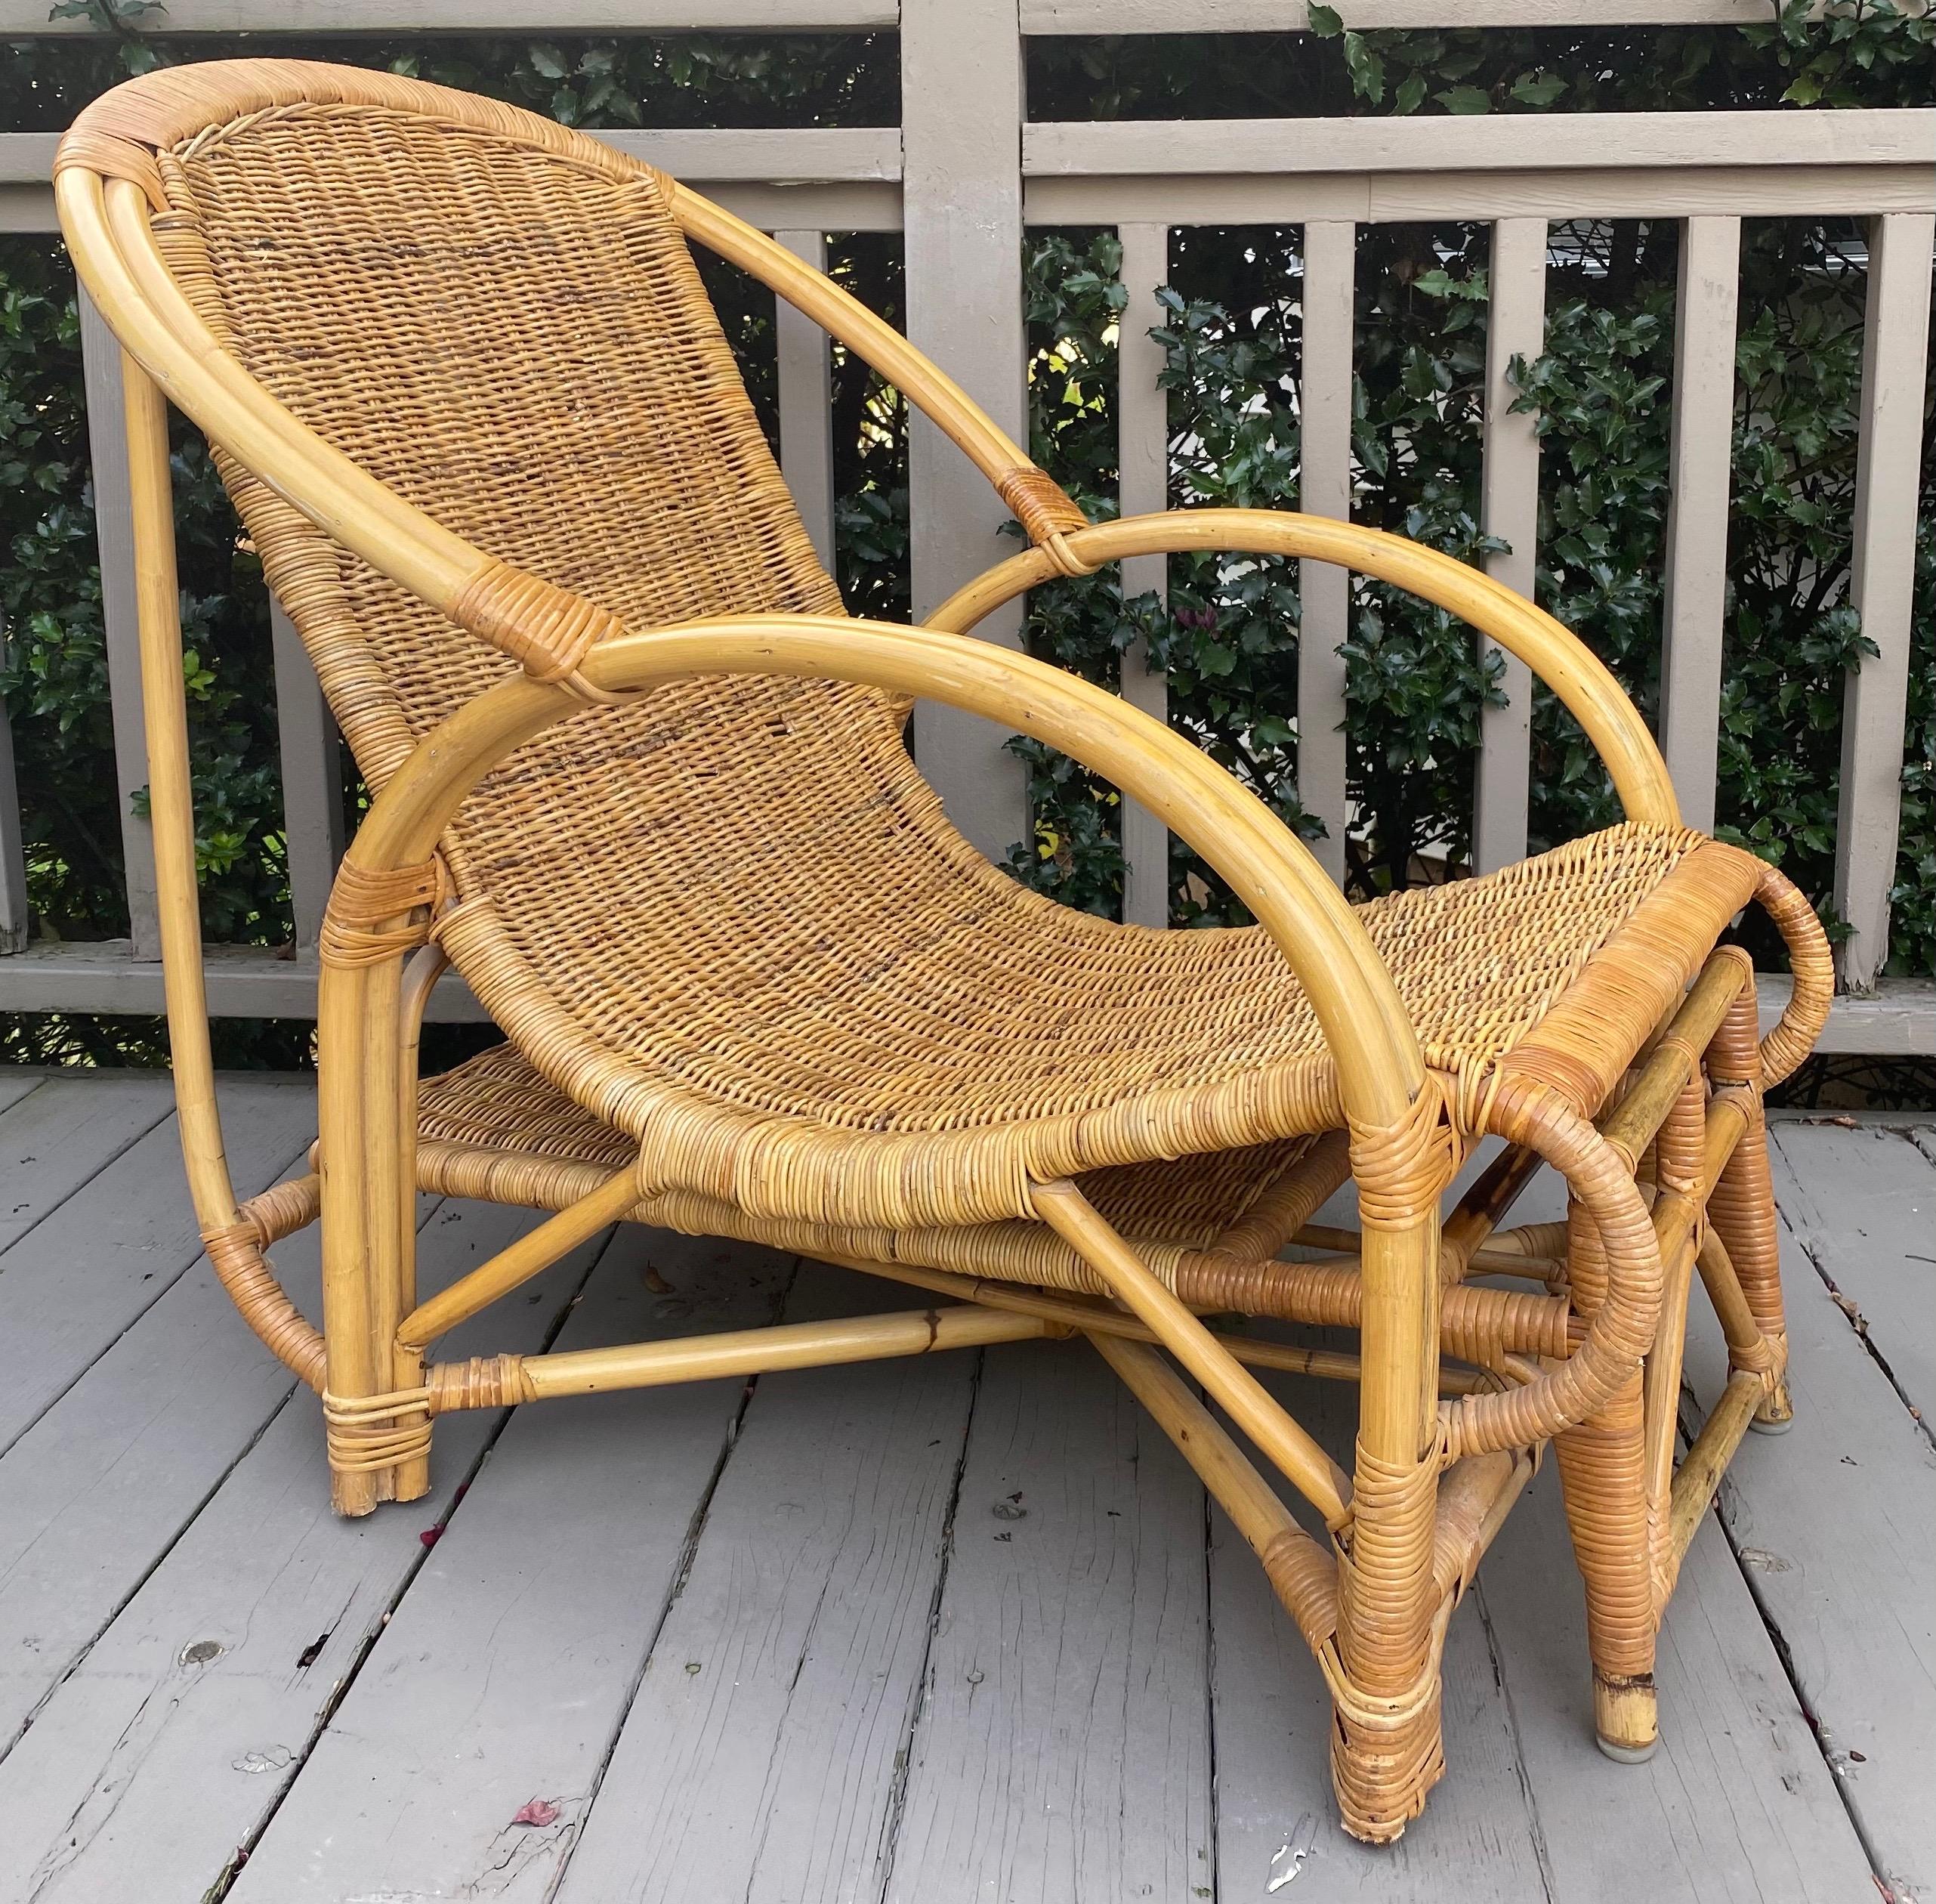 Unique Mid-Century Modern wicker lounge chair with extendable pull-out ottoman. This sculptural chaise features a long pull-out ottoman which can be extended to desired position. The chair and ottoman frames frames are constructed of sturdy bamboo.